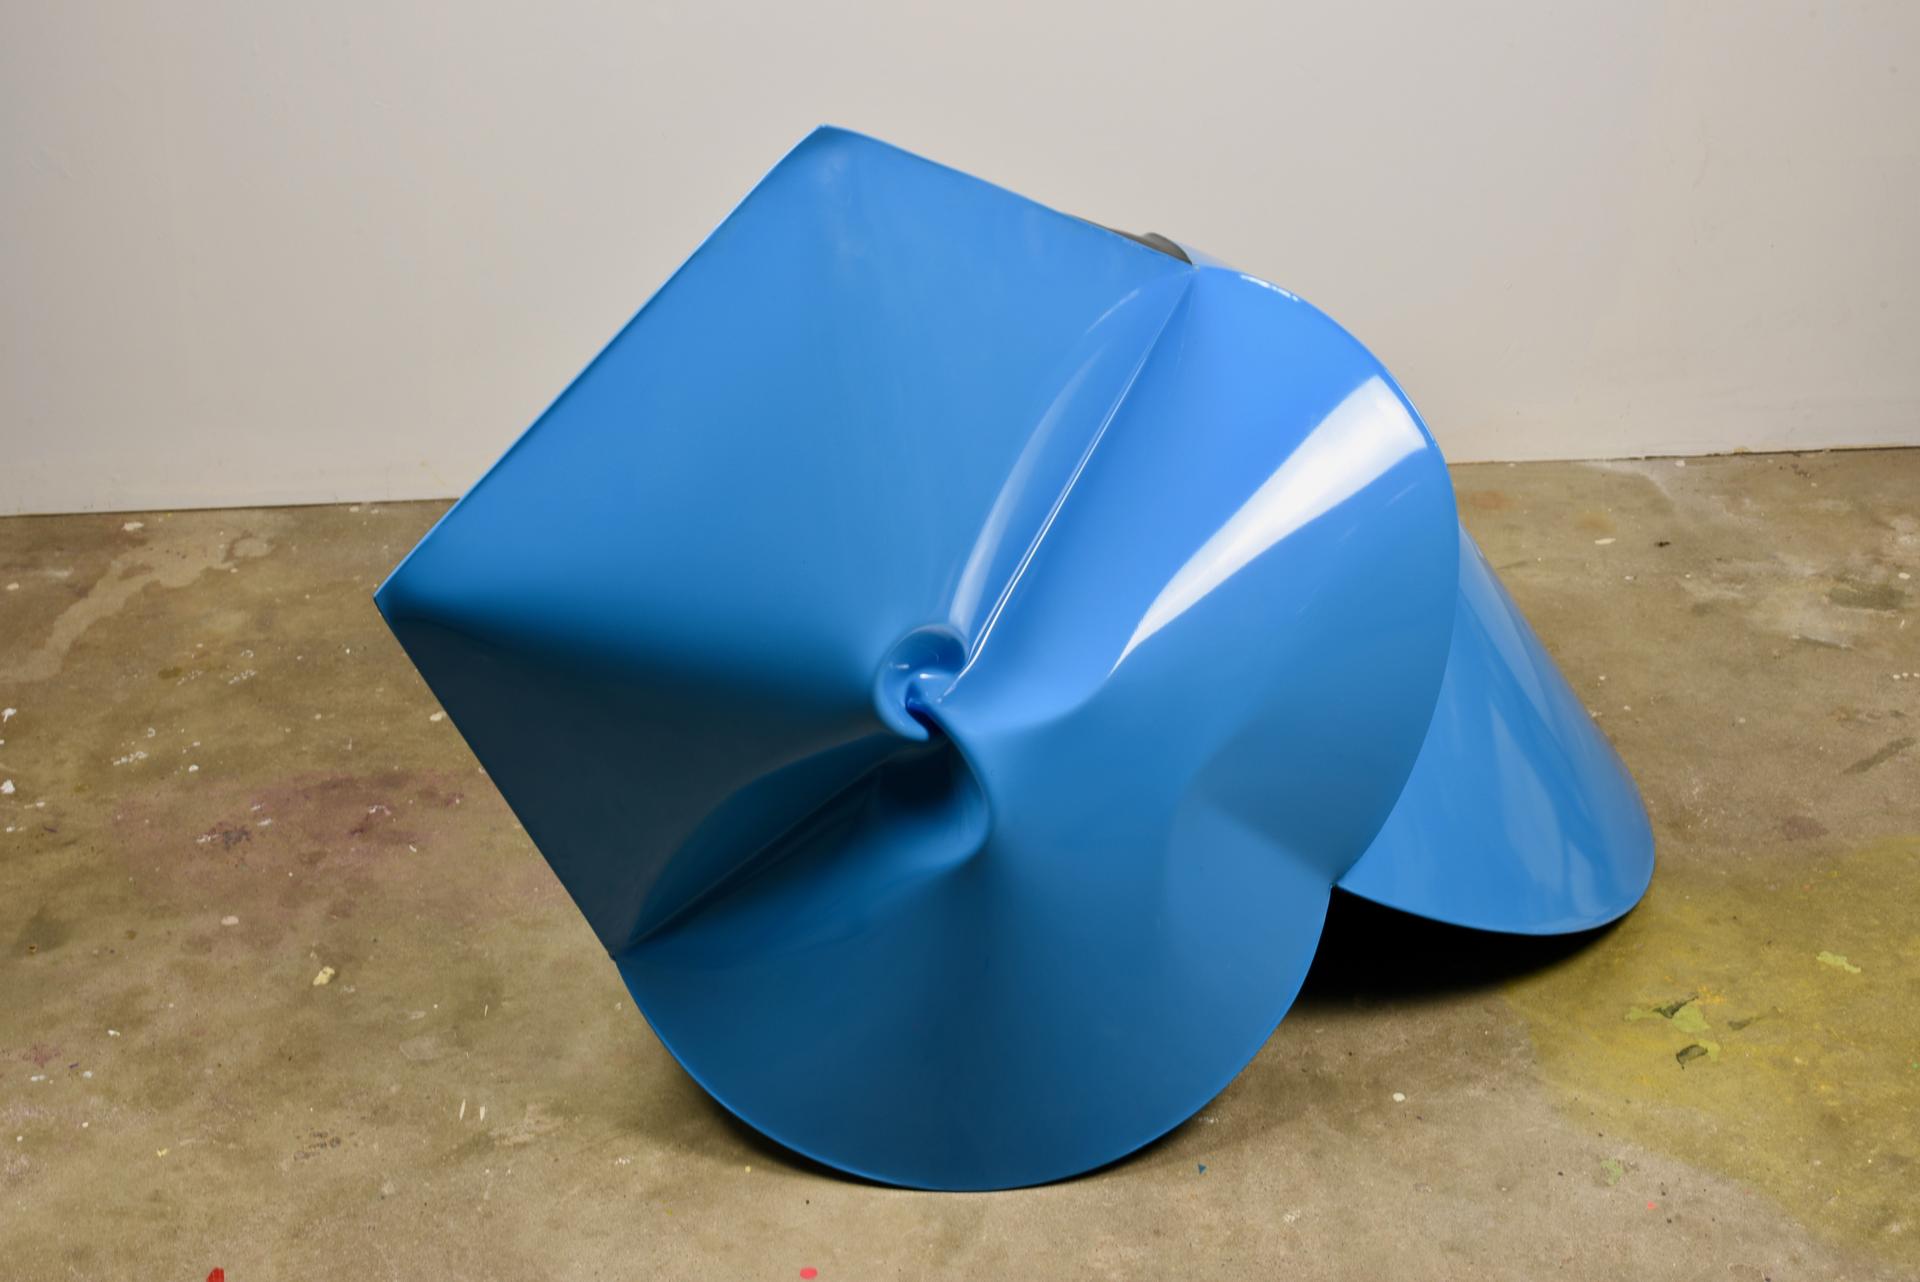 Jeremy Thomas, Ford Blue, 2021, Cold rolled steel, powder coat and urethane, 87.6 x 83.8 x 132 cm